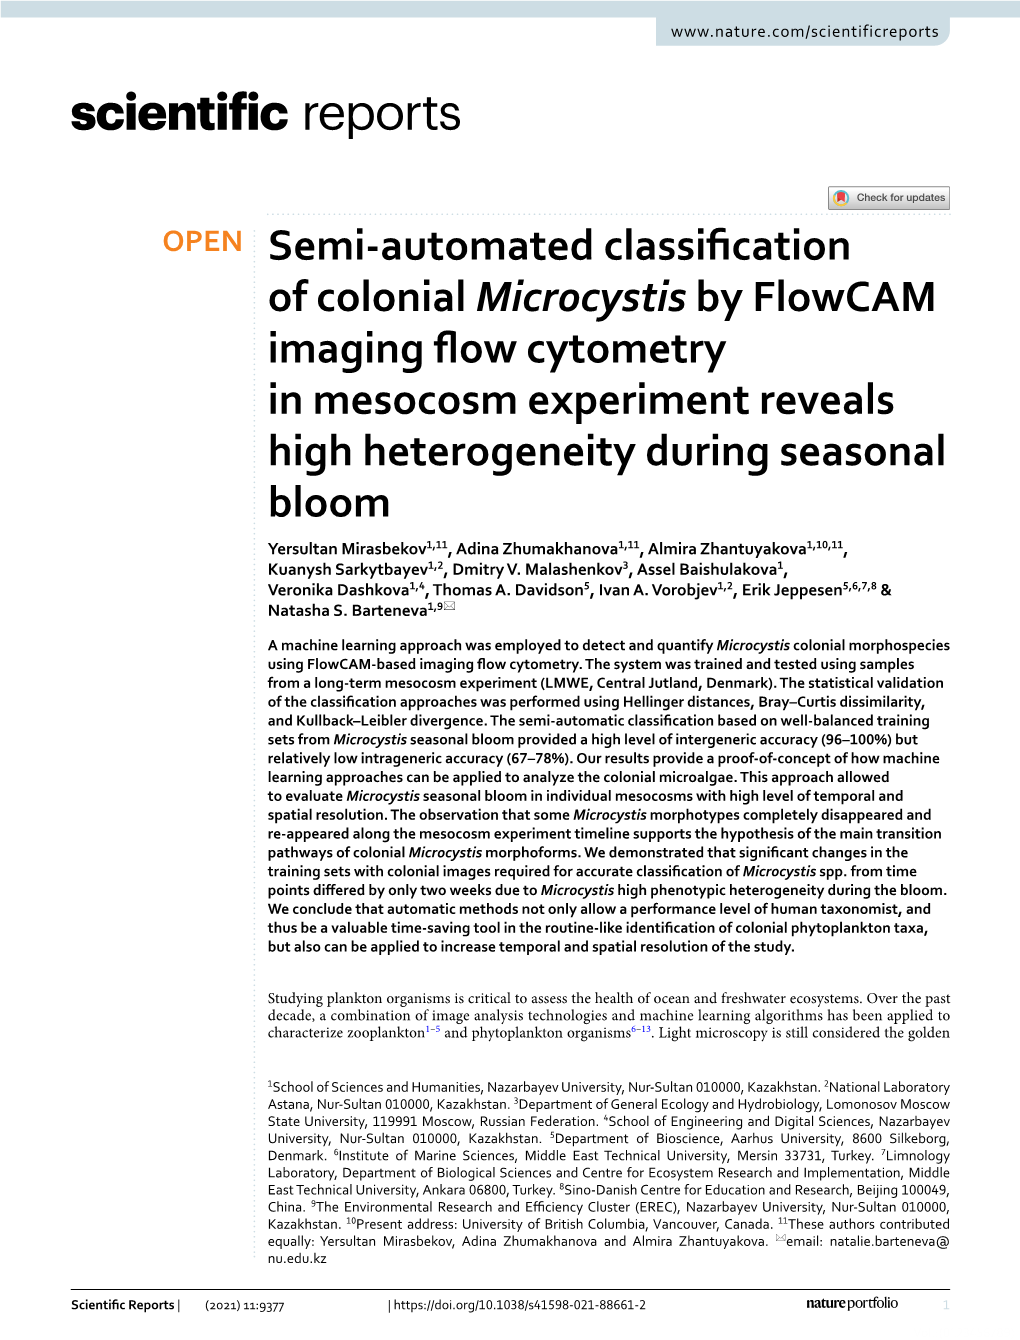 Semi-Automated Classification of Colonial Microcystis by Flowcam